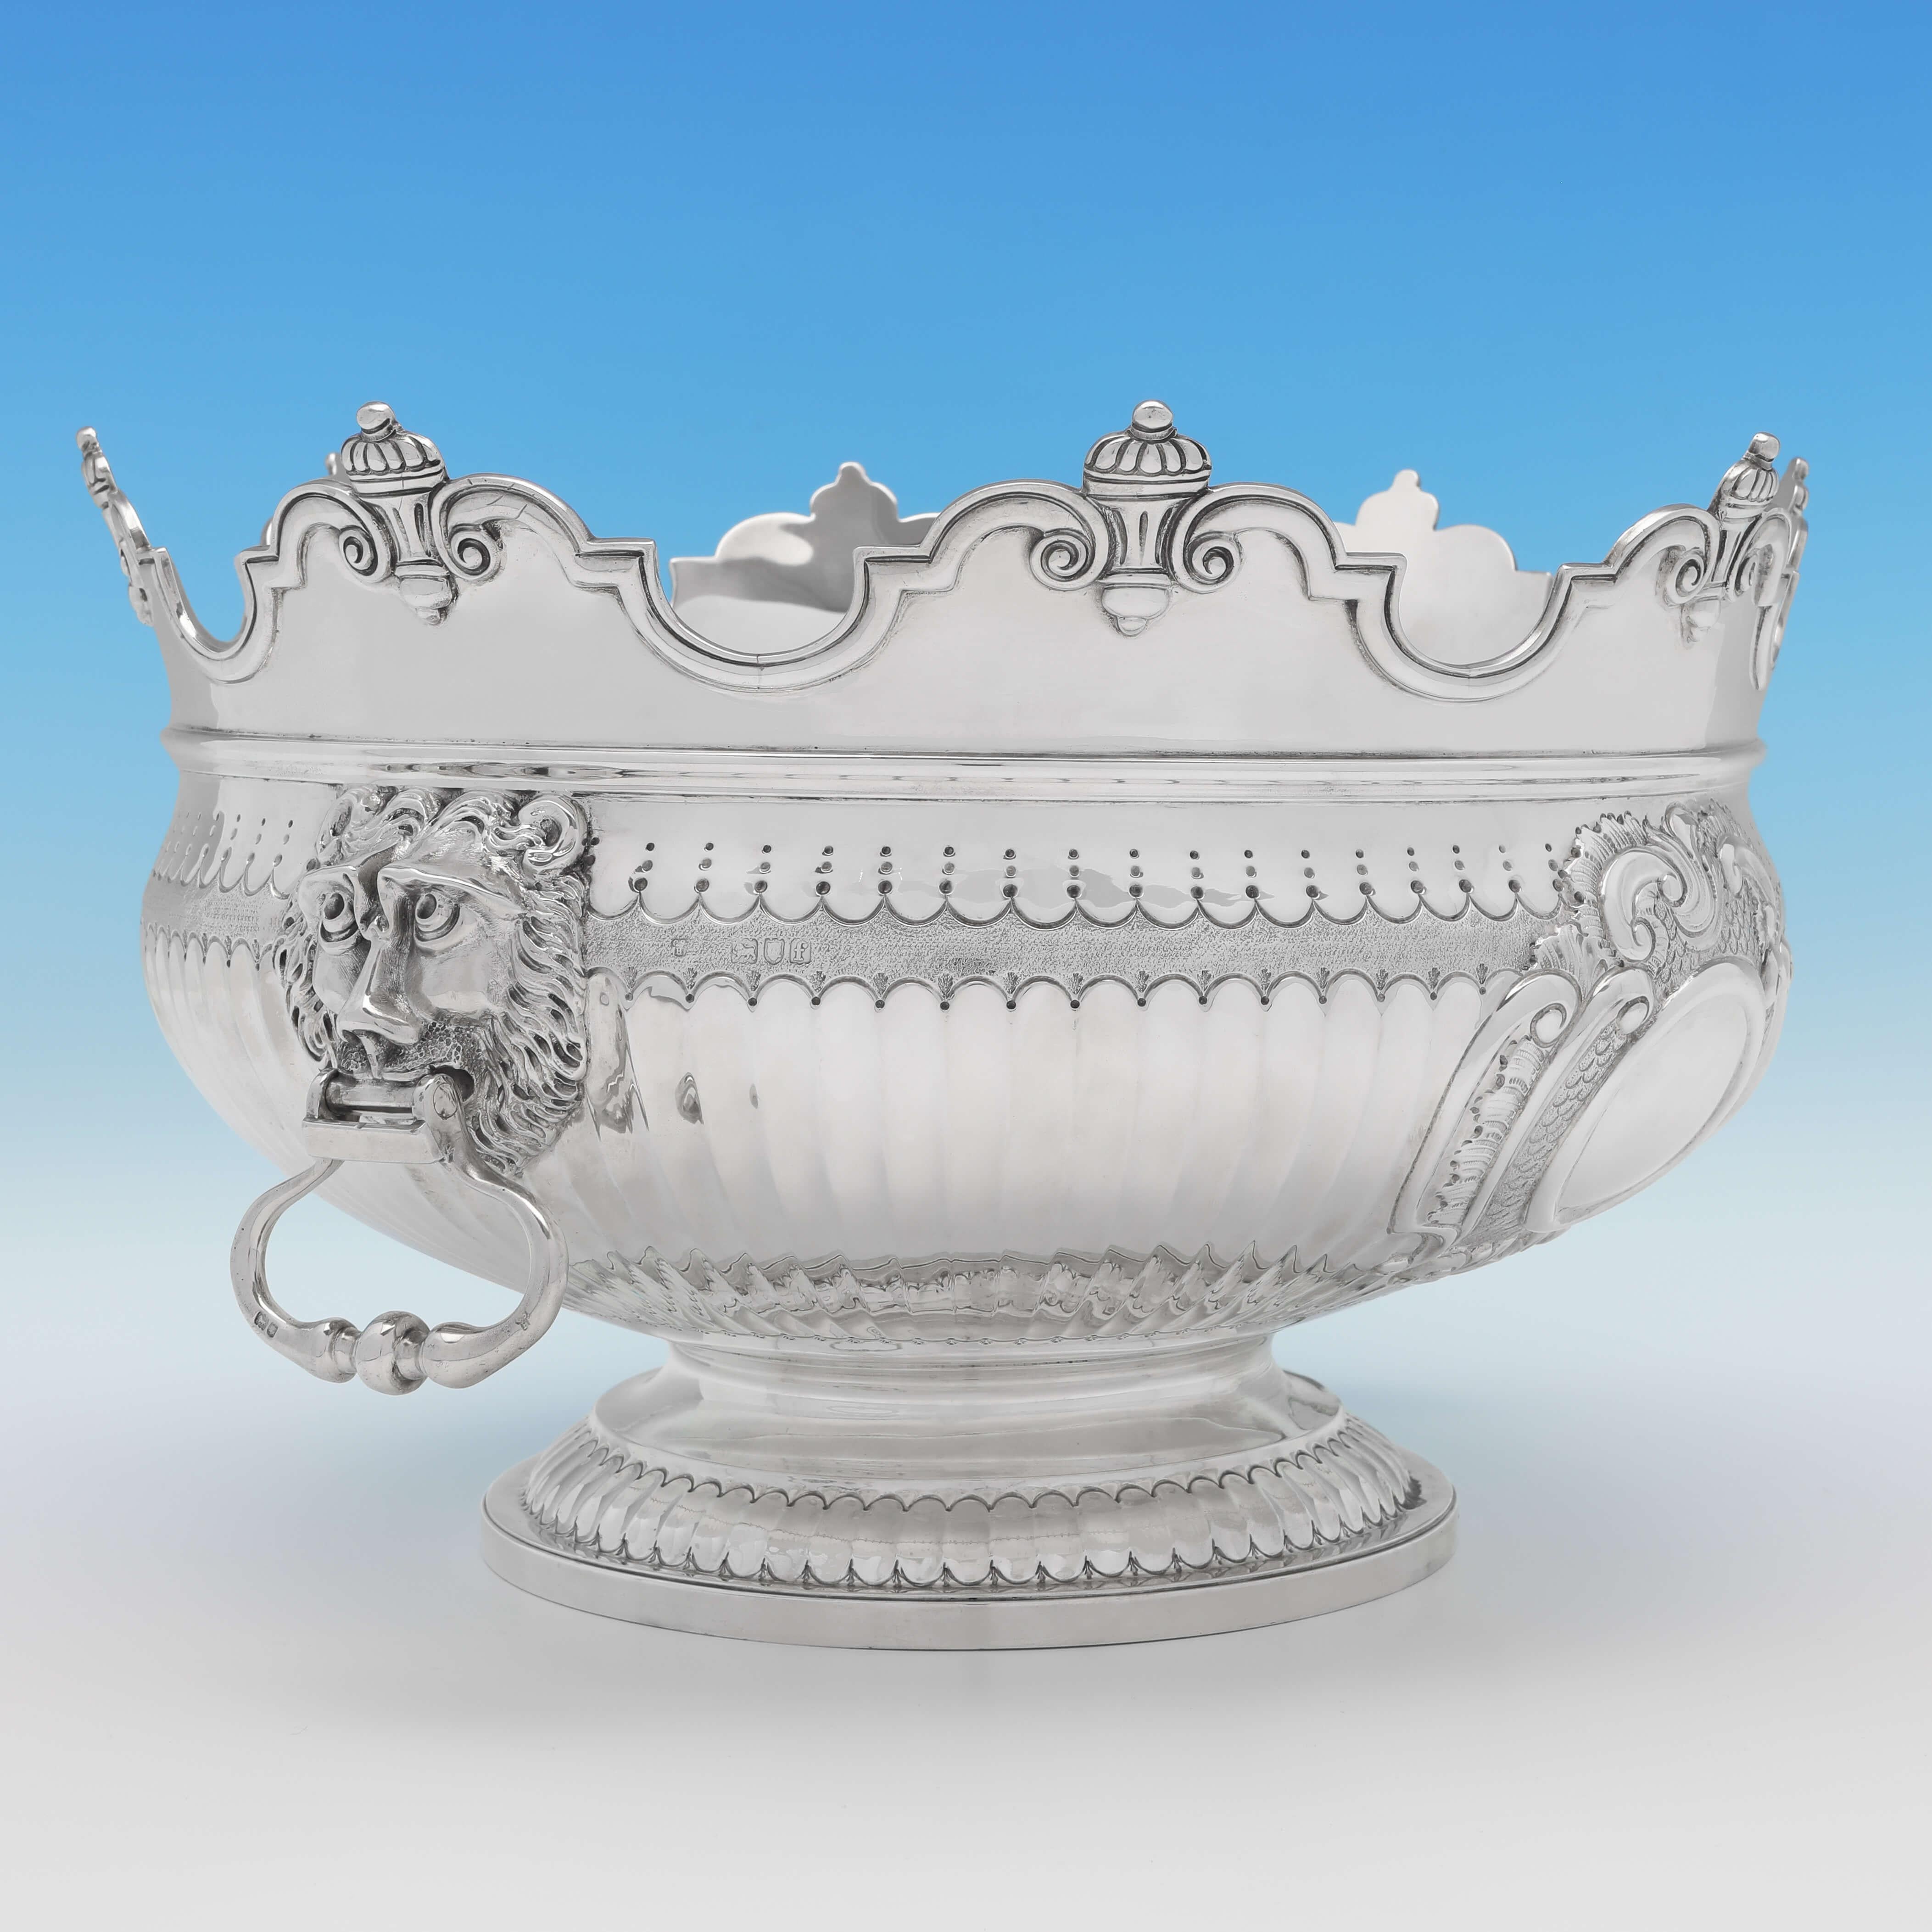 Hallmarked in London in 1901 by Charles Stuart Harris, this very attractive, Victorian, antique sterling silver bowl, features a Monteith style rim, lion mask drop ring handles, and engraved chased decoration throughout. The bowl measures